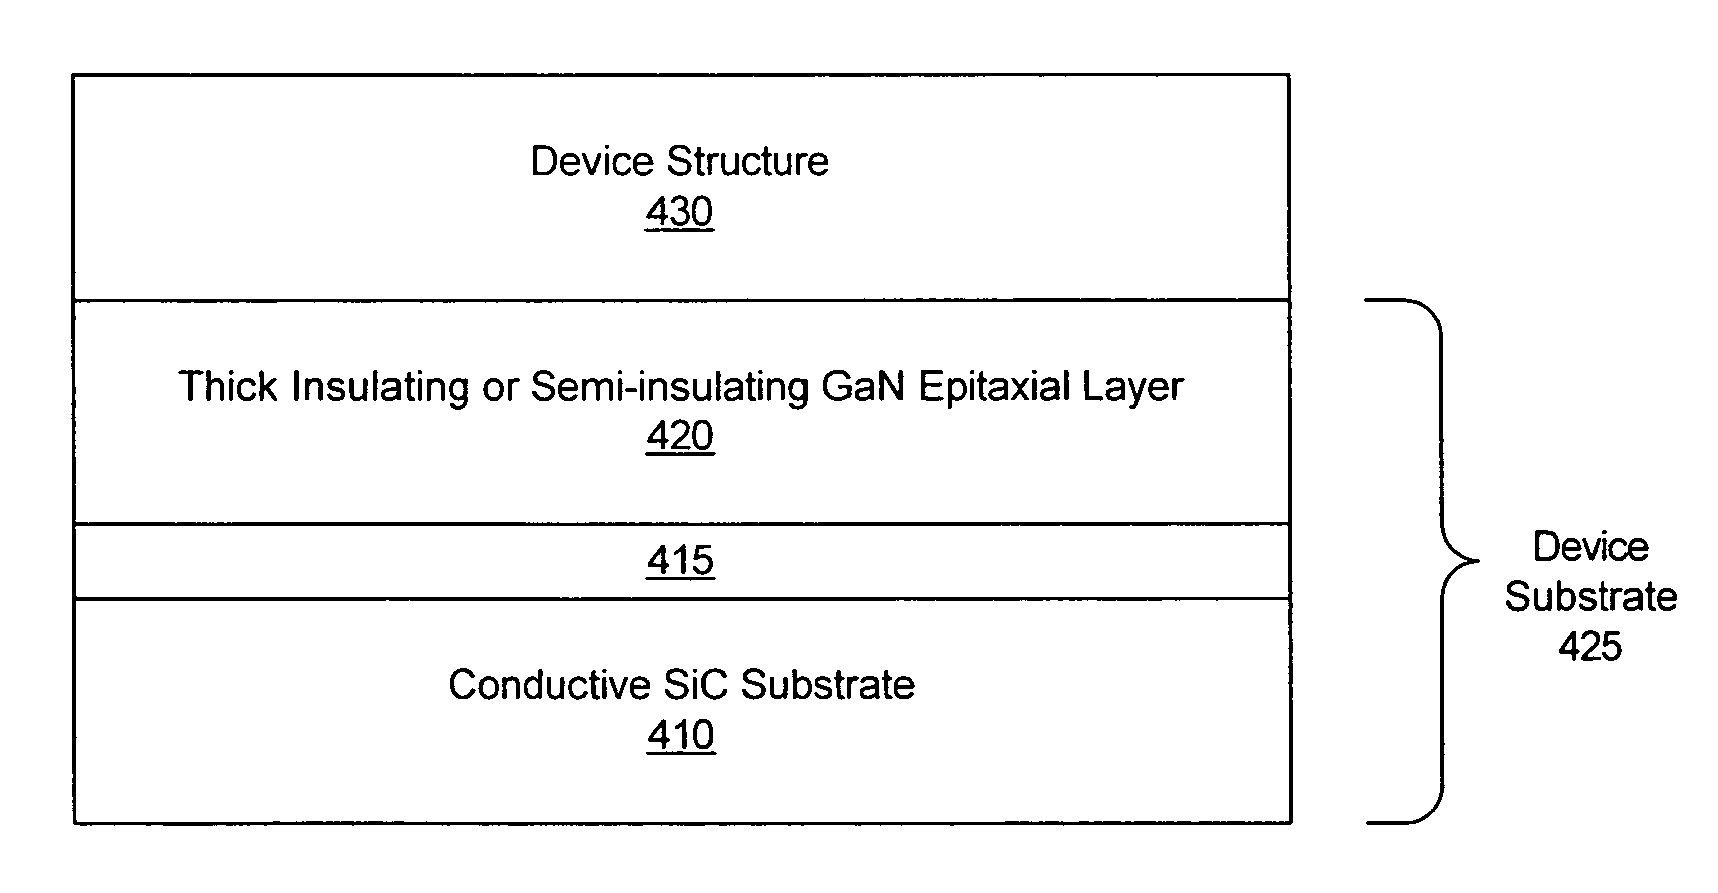 Thick semi-insulating or insulating epitaxial gallium nitride layers and devices incorporating same